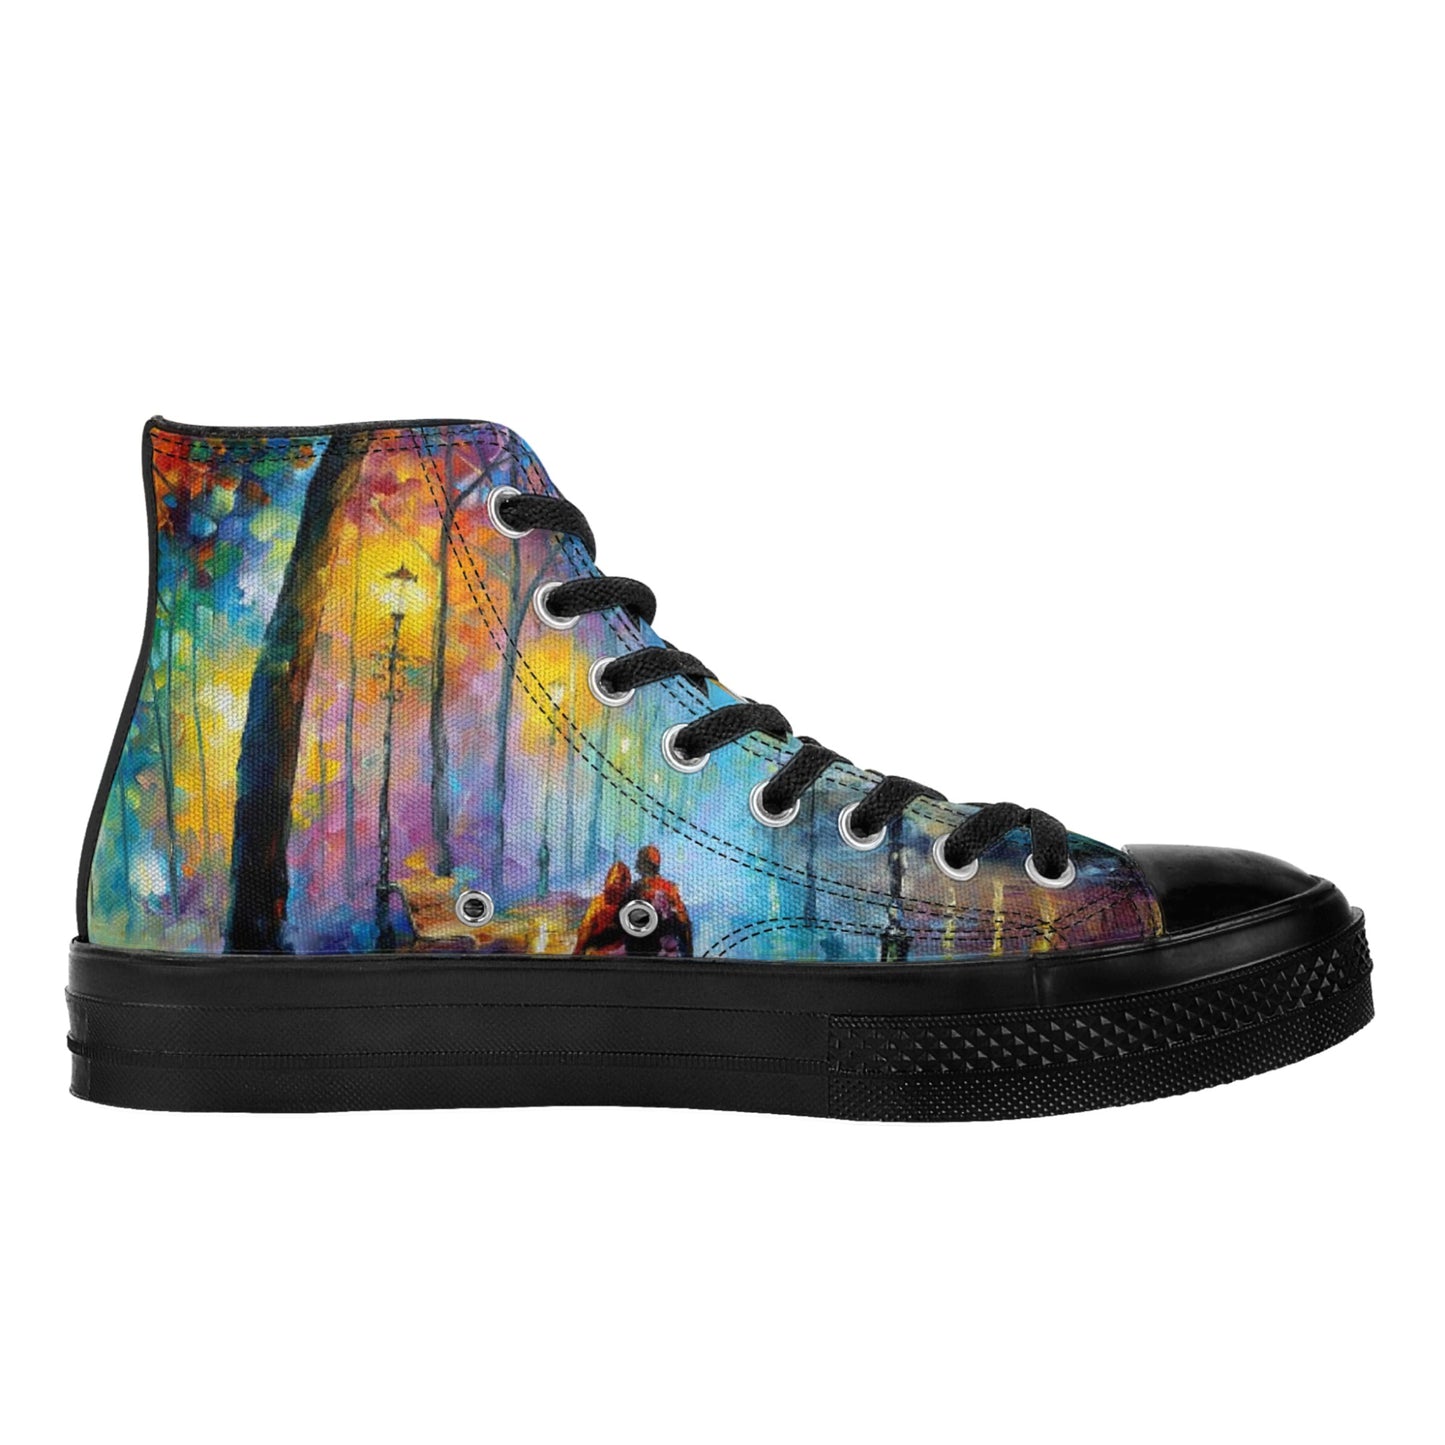 Men's Classic Black High Top Canvas Shoes Afremov Melody of The Night